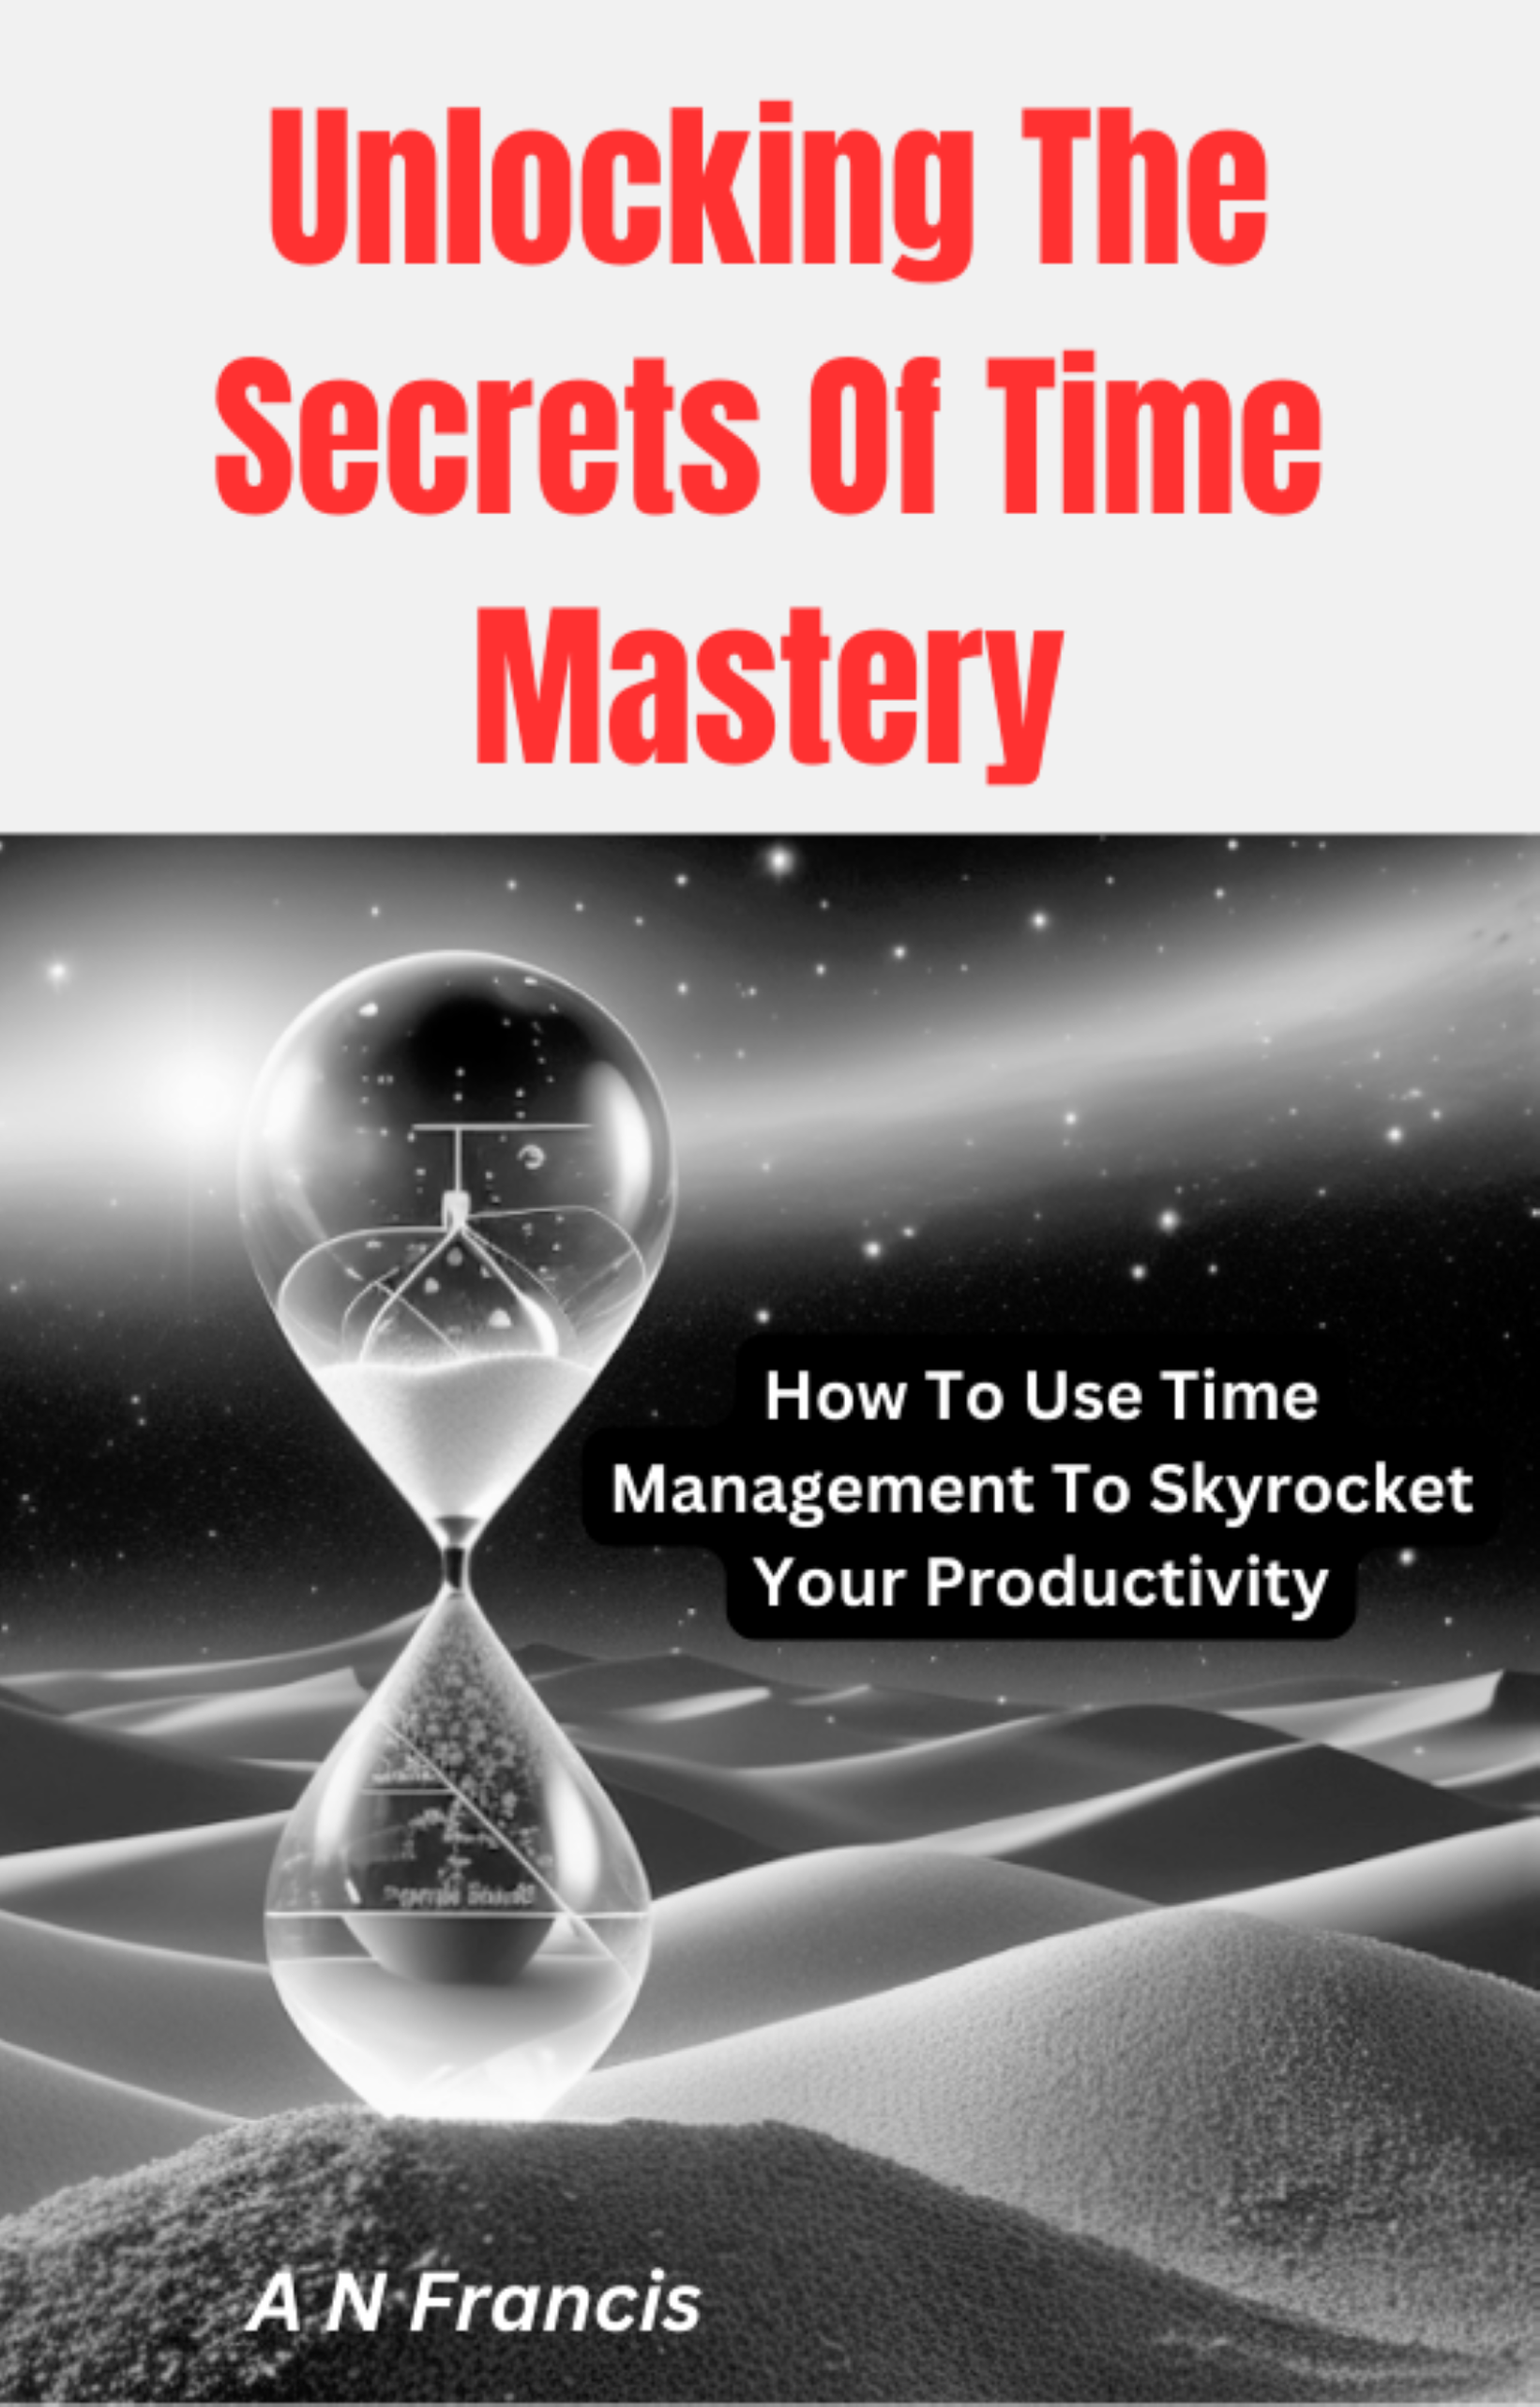 The Secrets Of Time Mastery